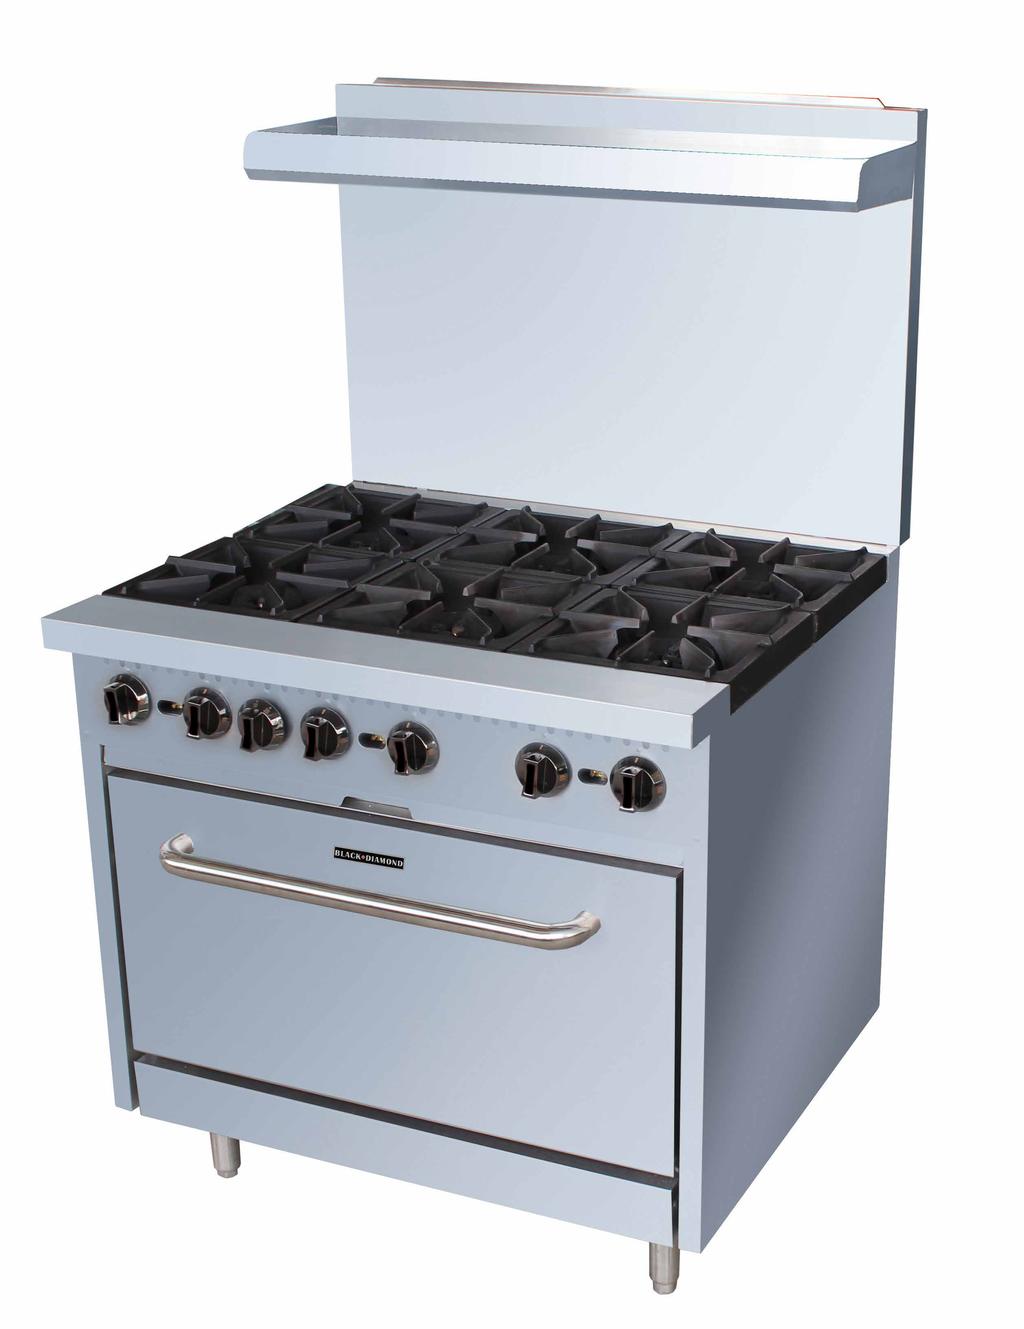 In a commercial kitchen this oven becomes the heart of the cooking line and choosing the right range is a key element to having a smooth and